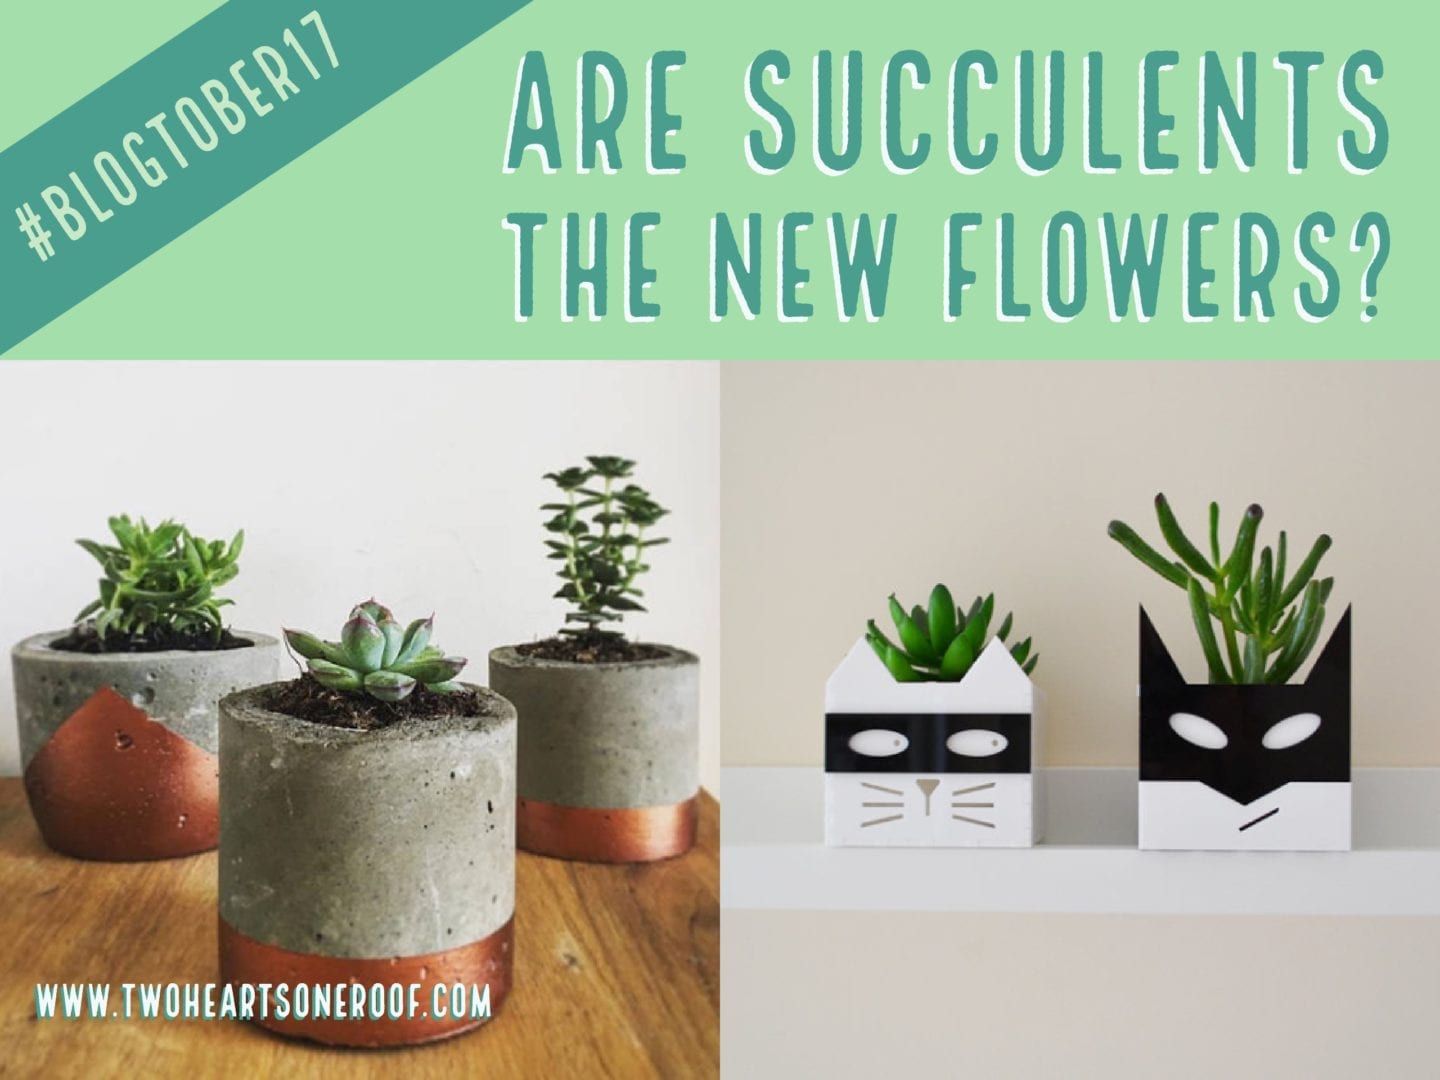 Are Succulents the New Flowers? – Blogtober 17